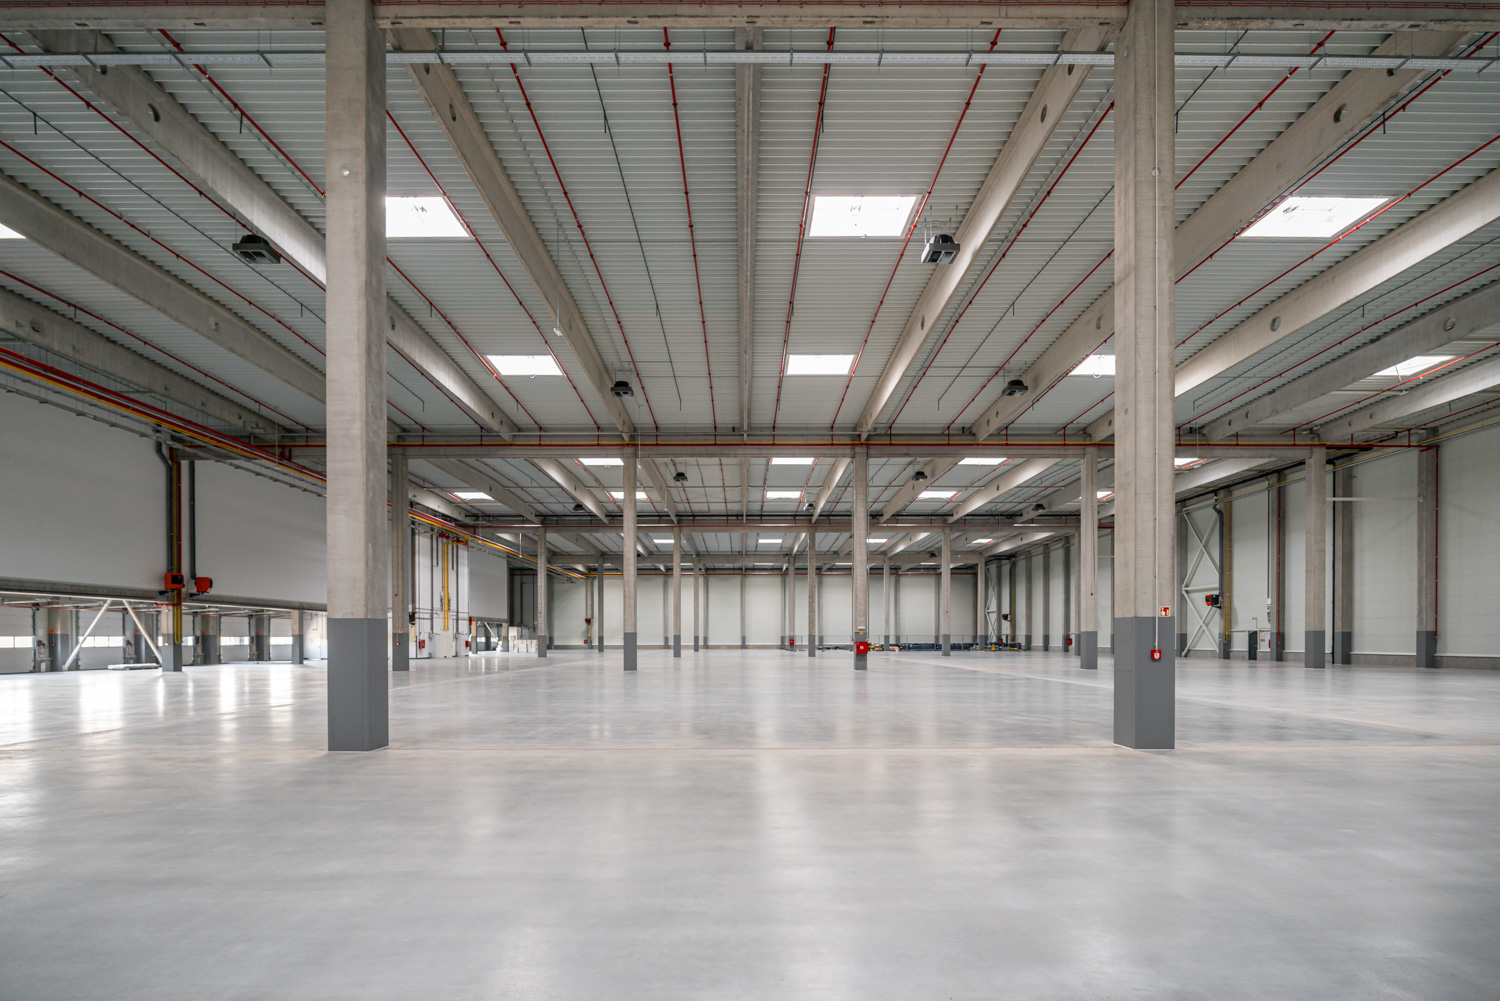 Wing Completes Hall in East Gate Pro Business Park